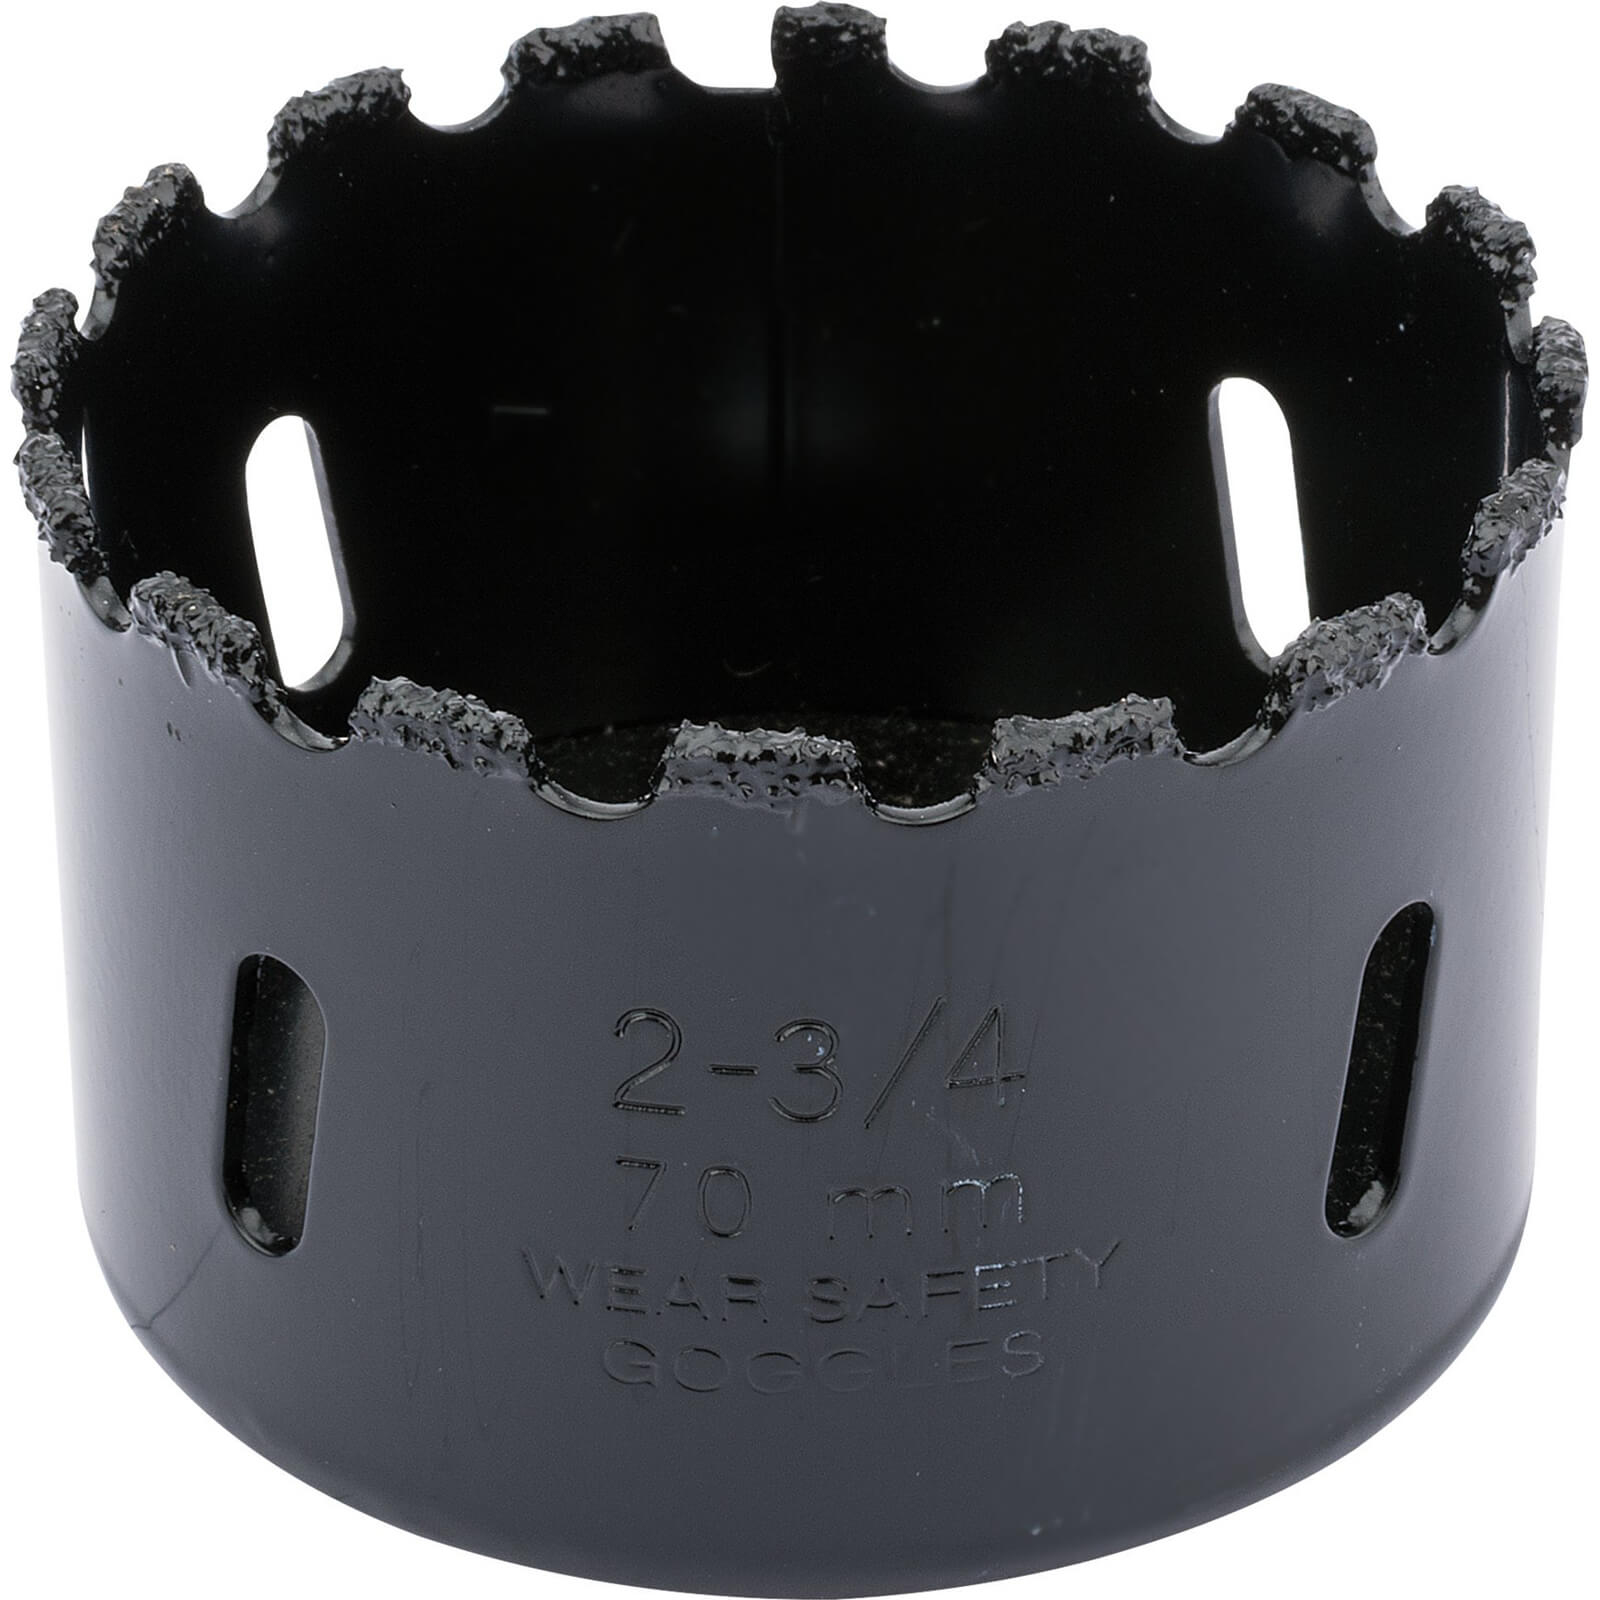 Image of Draper Expert Tungsten Carbide Grit Hole Saw 70mm